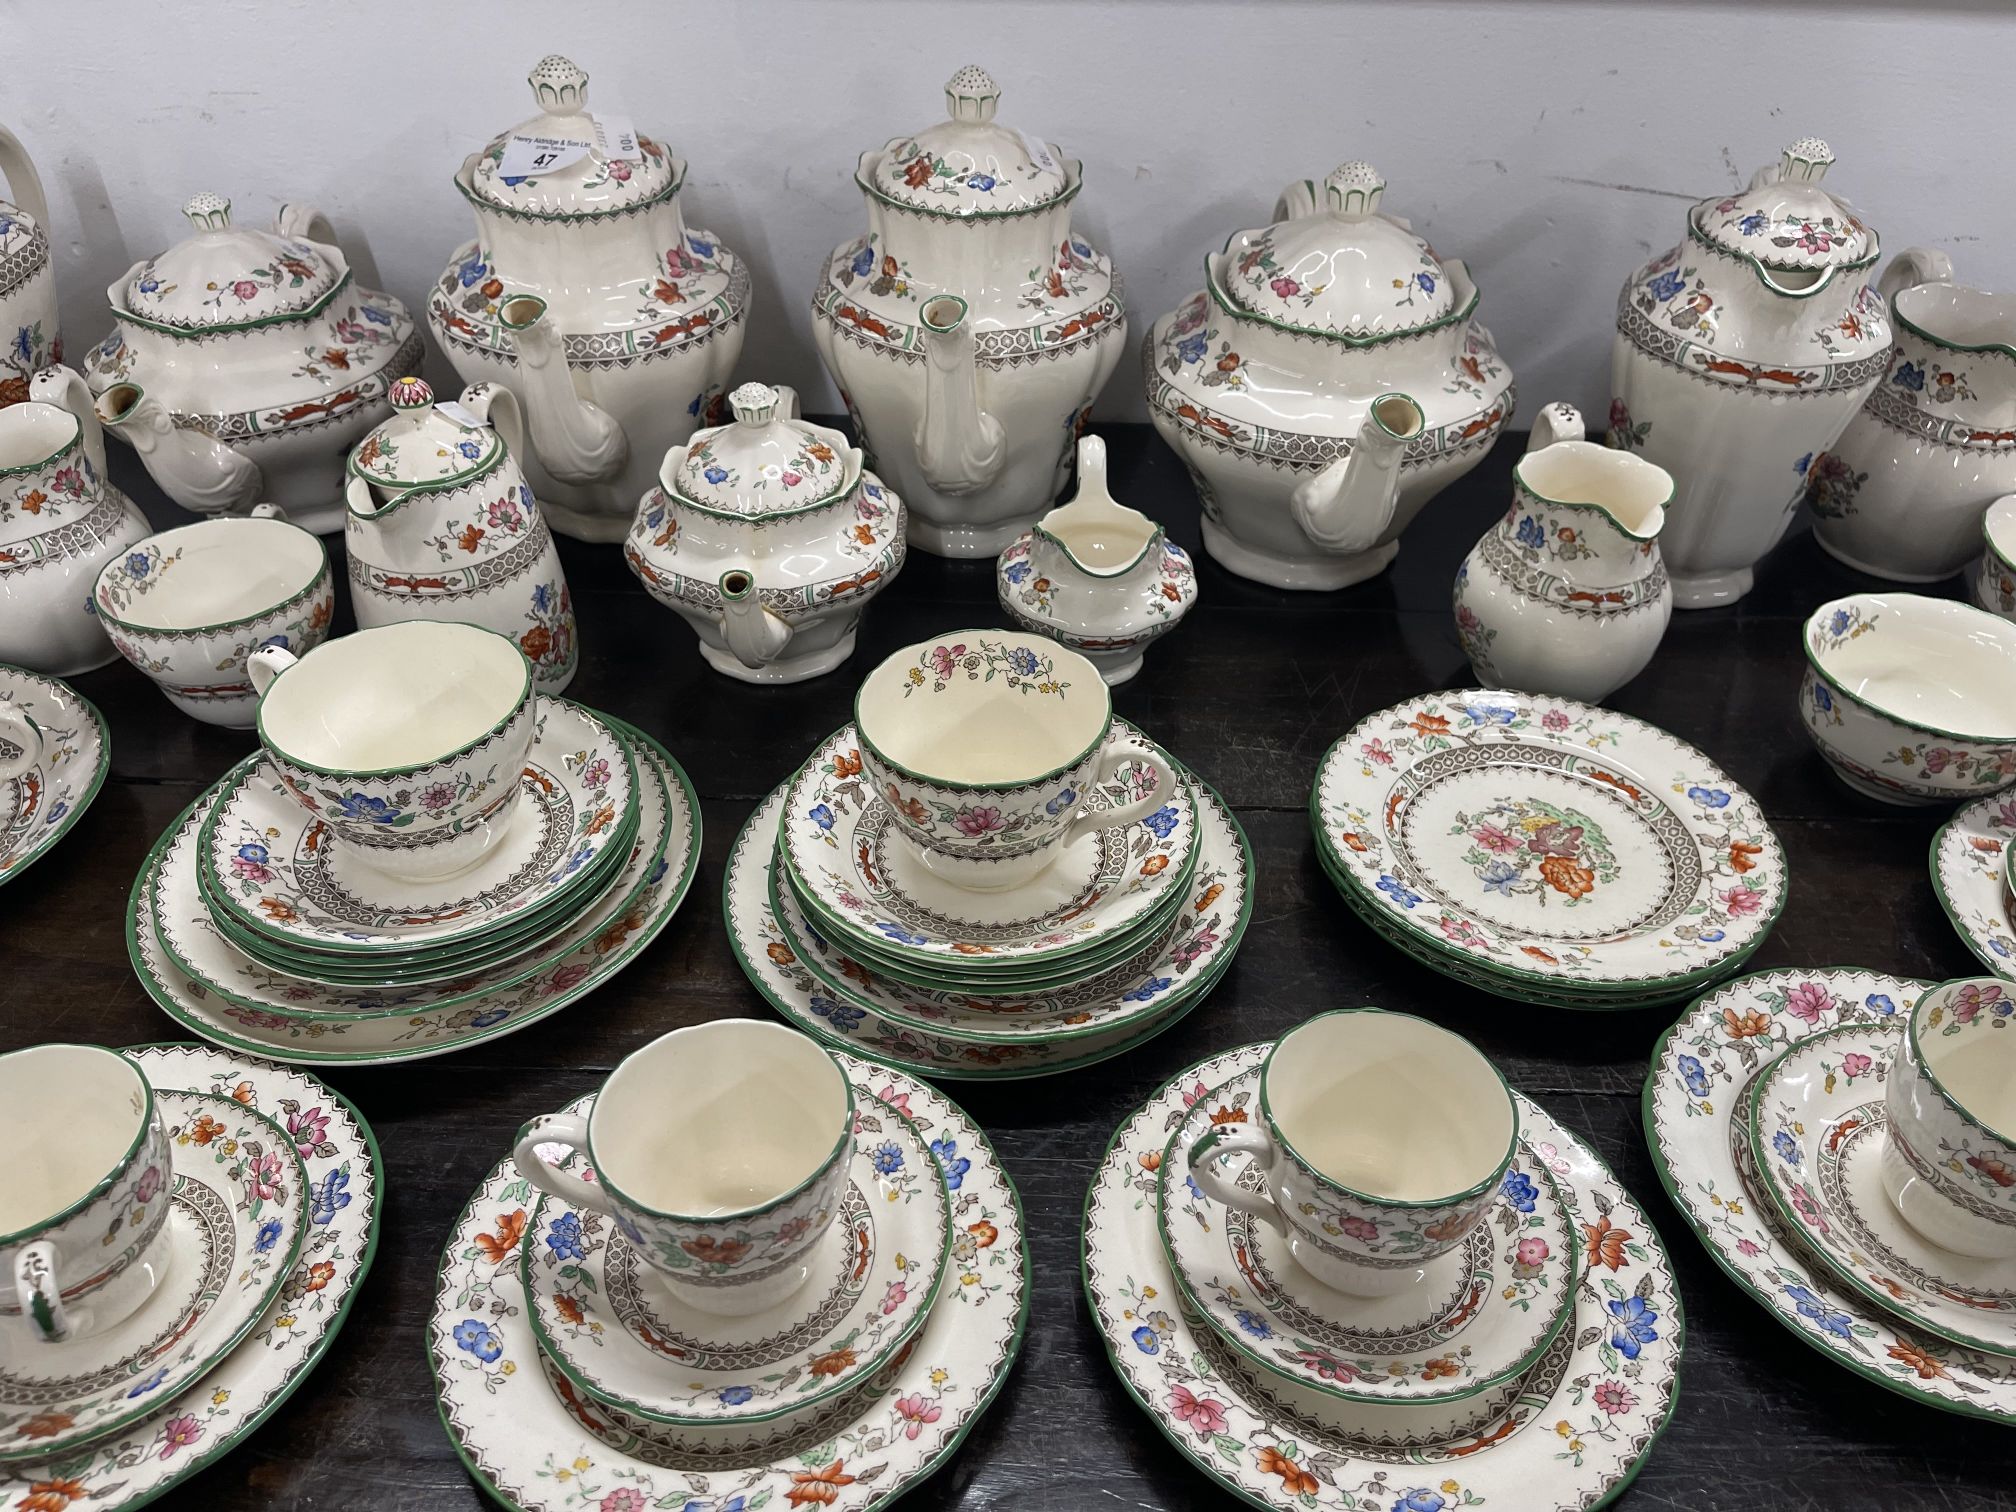 Copeland Spode 'Chinese Rose' tea service comprising plates (6½ins) x 13, coffee cups x 10, - Image 3 of 4